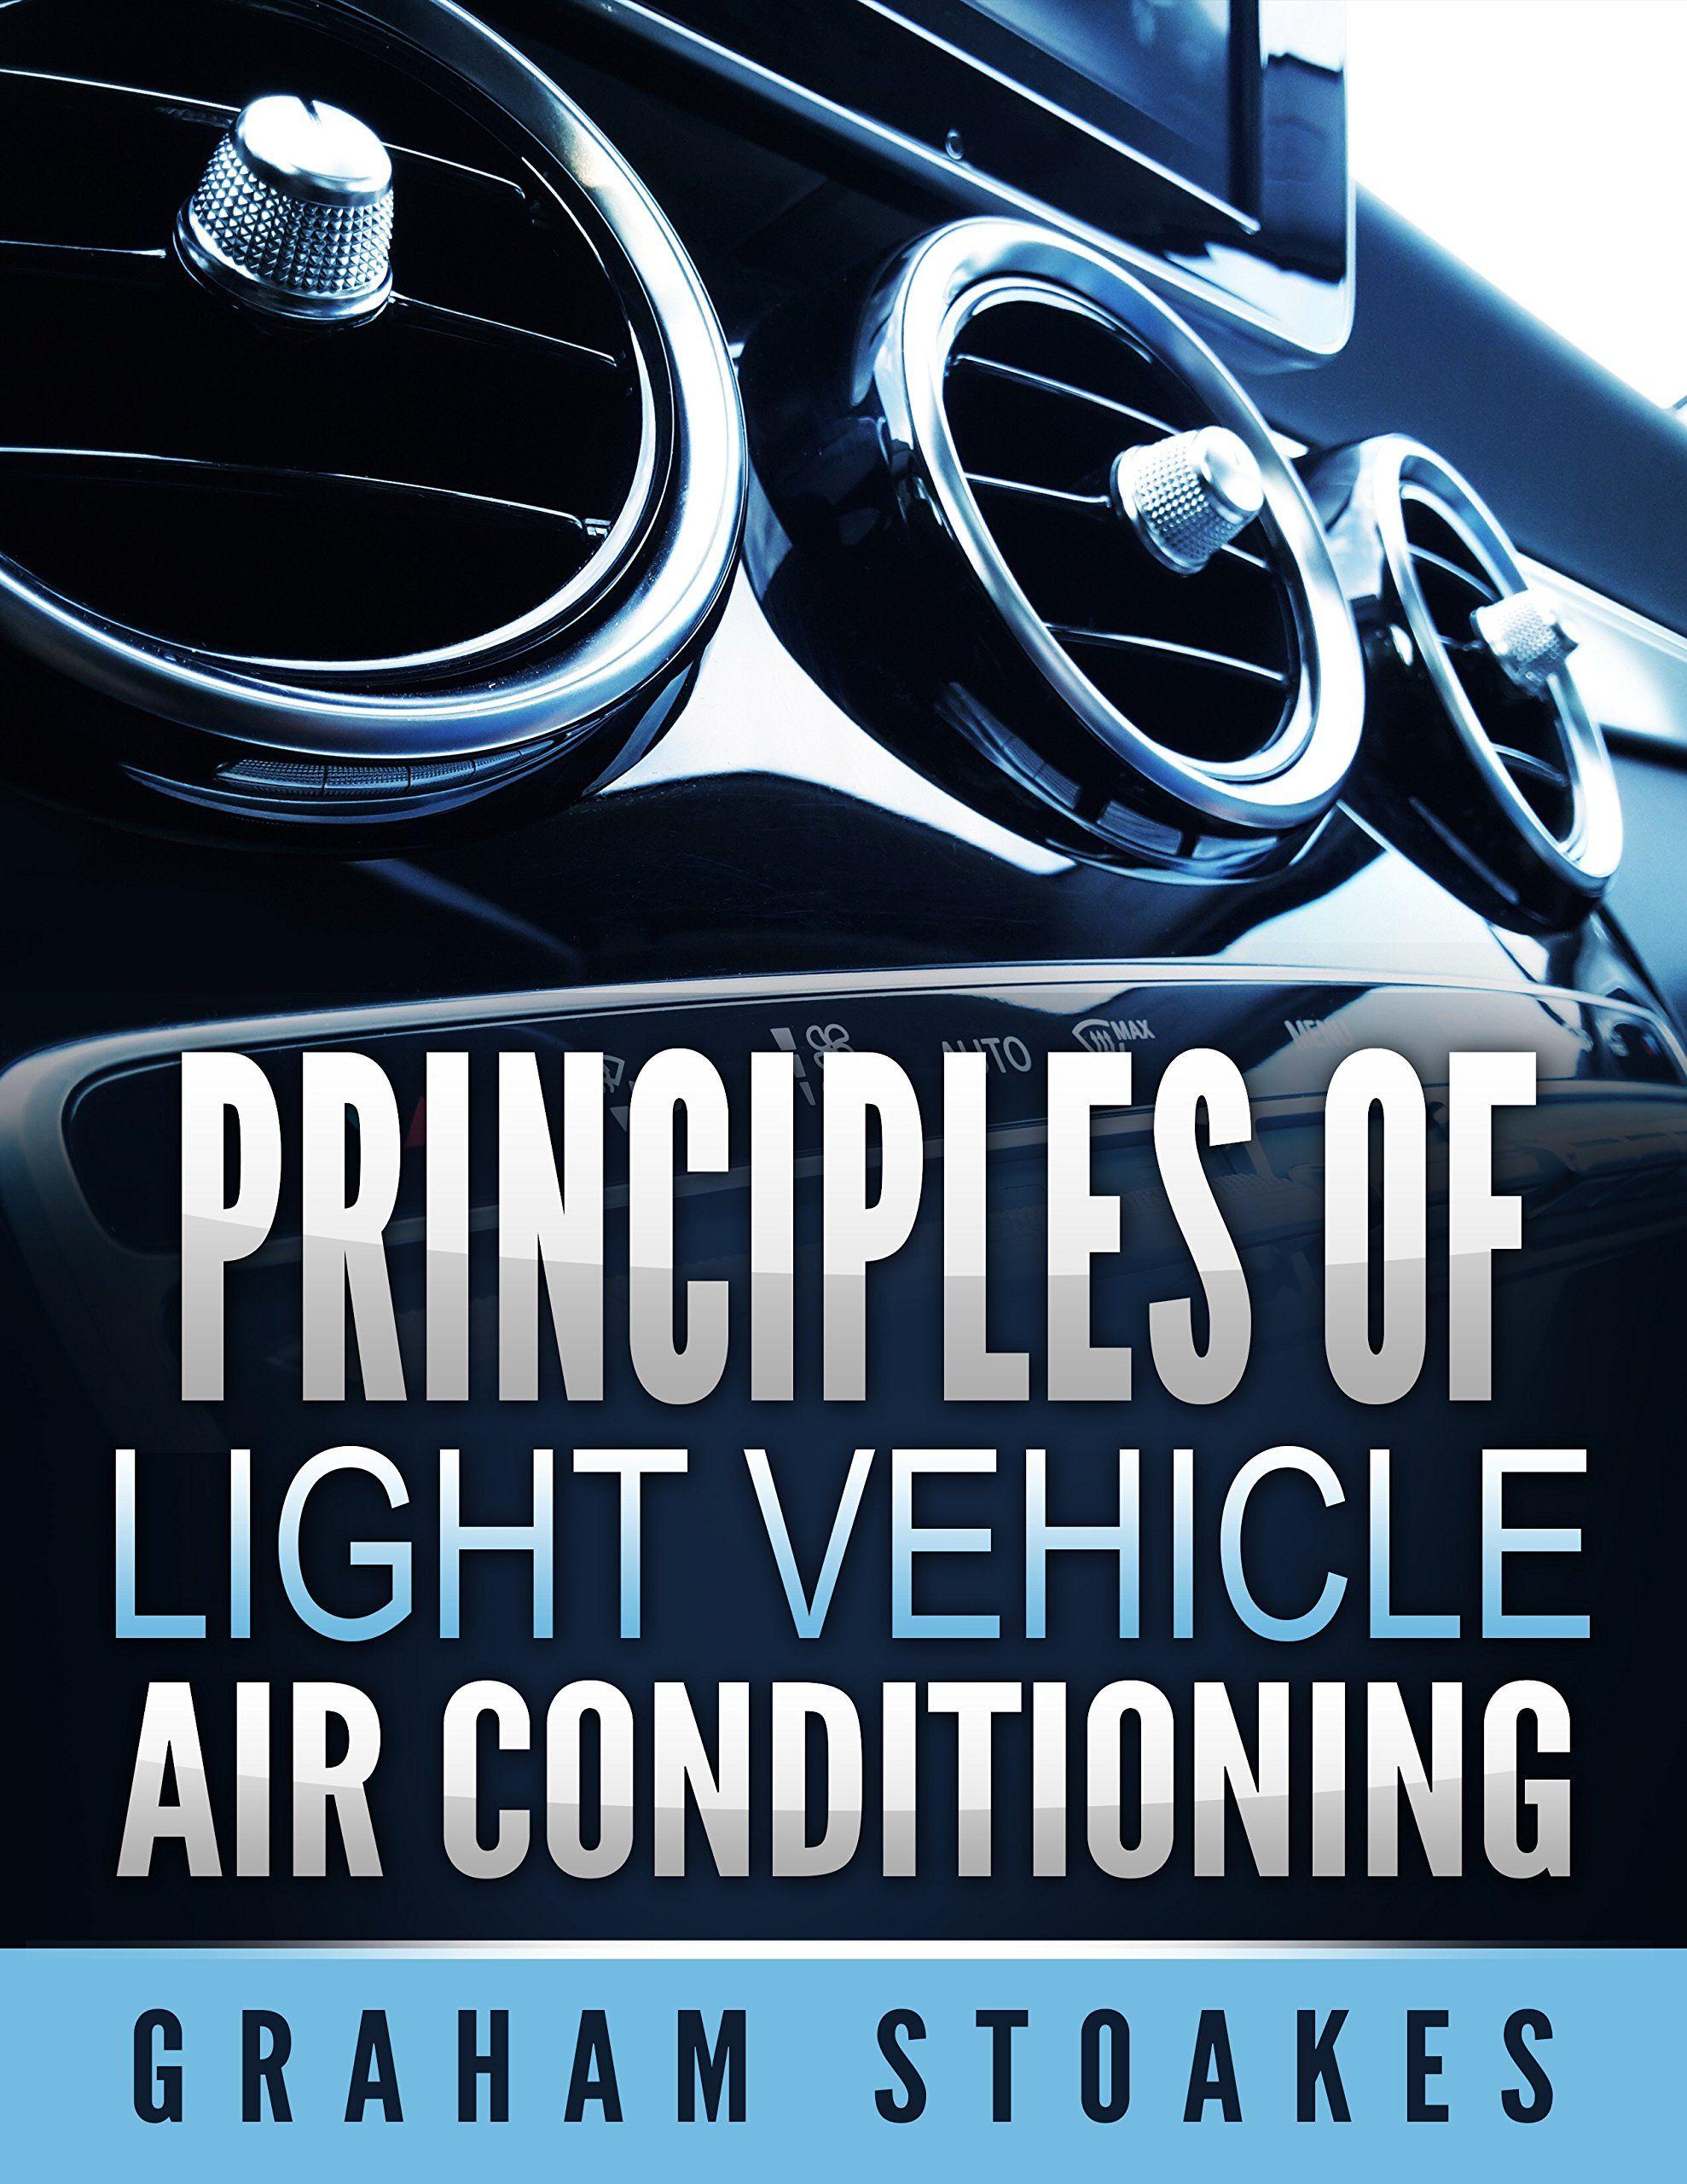 Automotive Air Conditioning Logo - Principles of Light Vehicle Air Conditioning: Amazon.co.uk: Graham ...